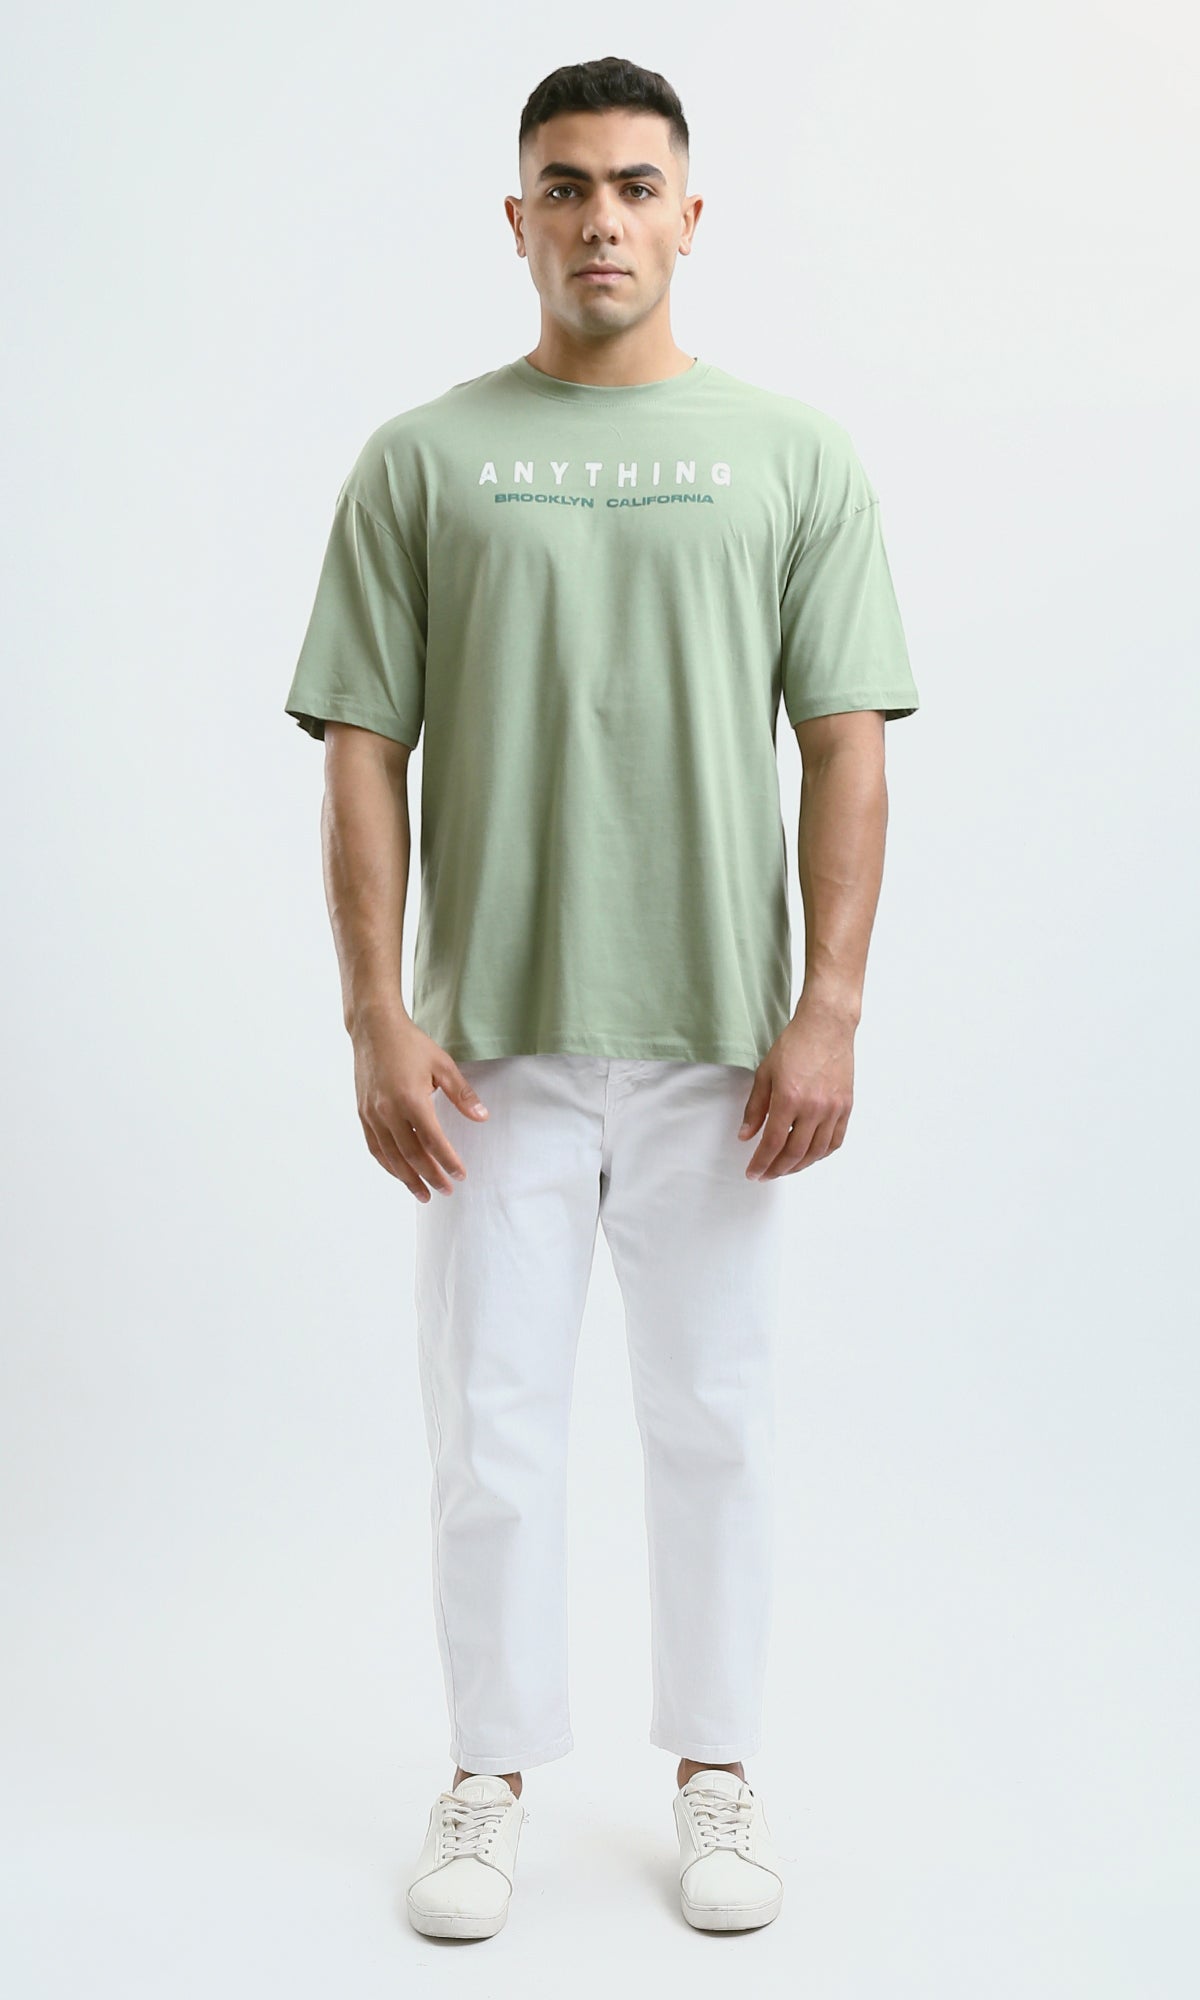 O188747 Printed "Anything" Light Olive Mix Tee